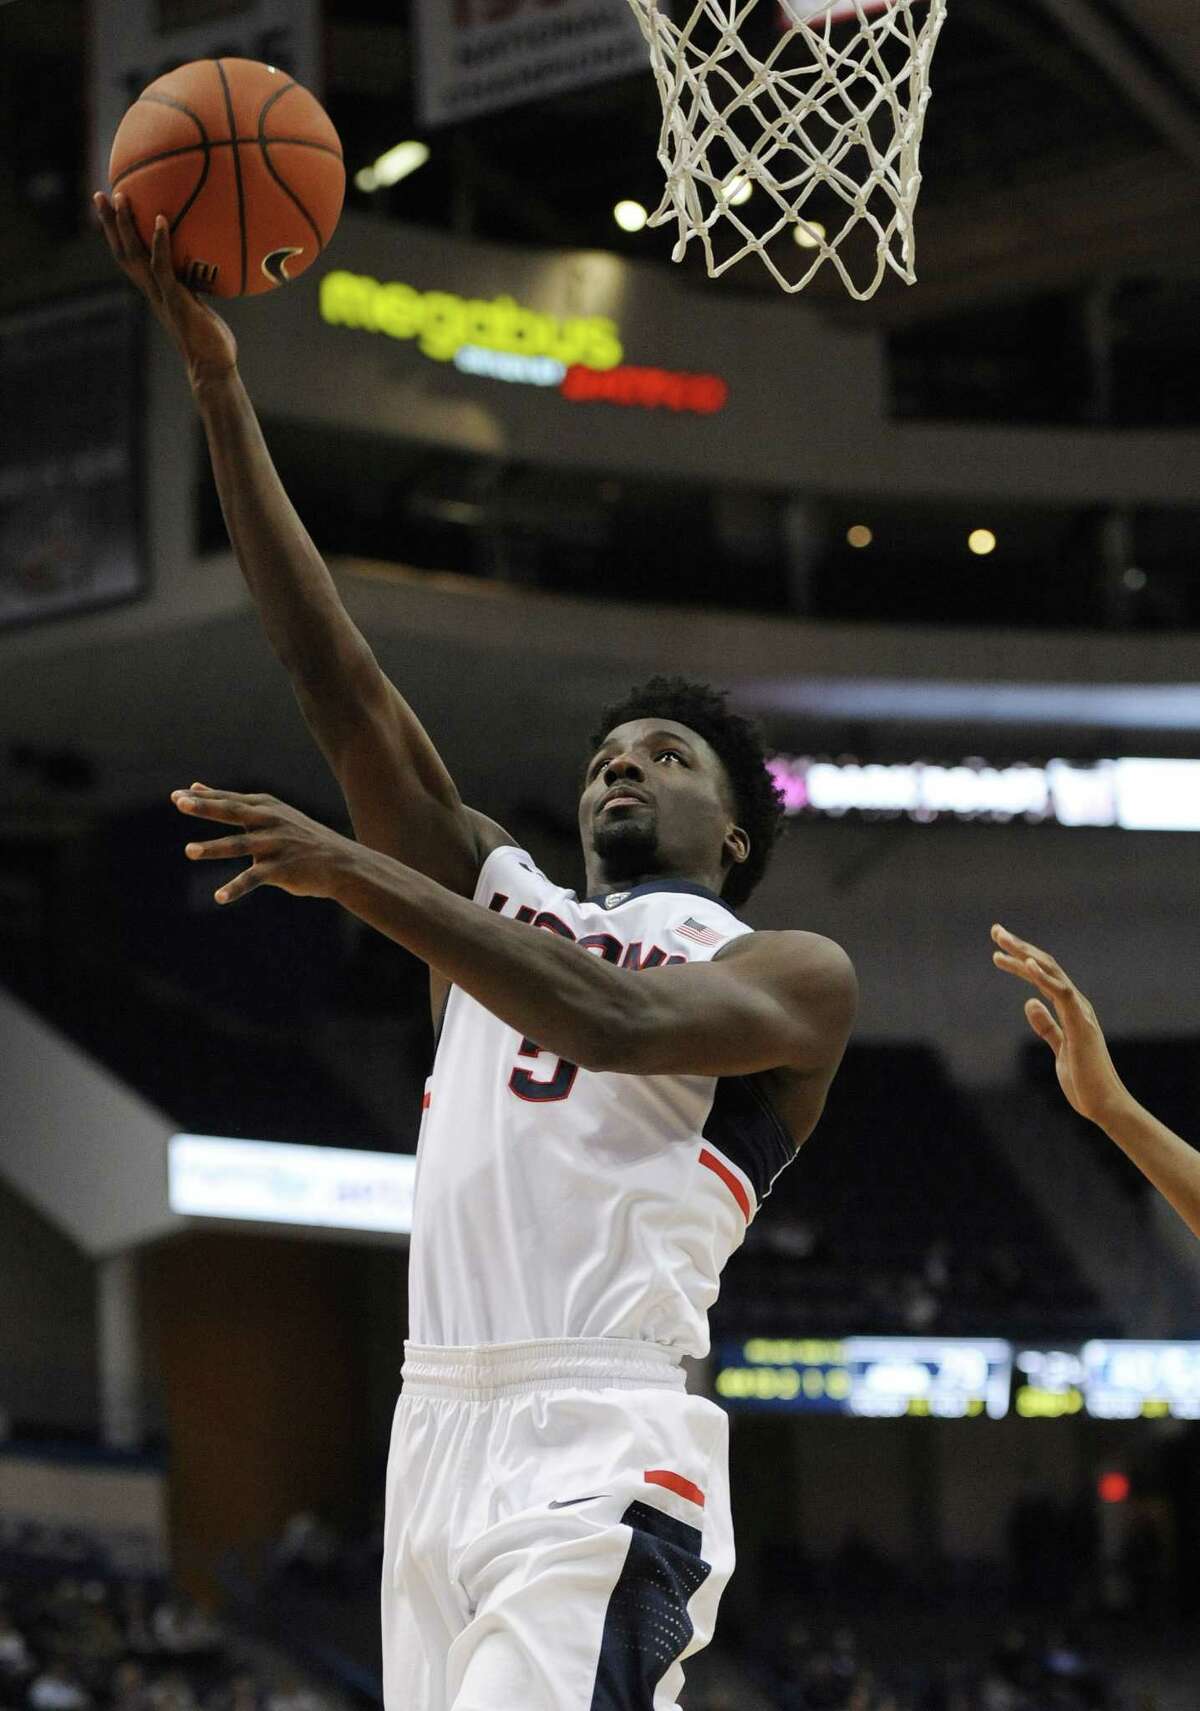 Connecticut's Daniel Hamilton goes up for a basket in the second half of an NCAA college basketball game against Central Connecticut State, Wednesday, Dec. 23, 2015, in Hartford, Conn. UConn won 99-52. (AP Photo/Jessica Hill)